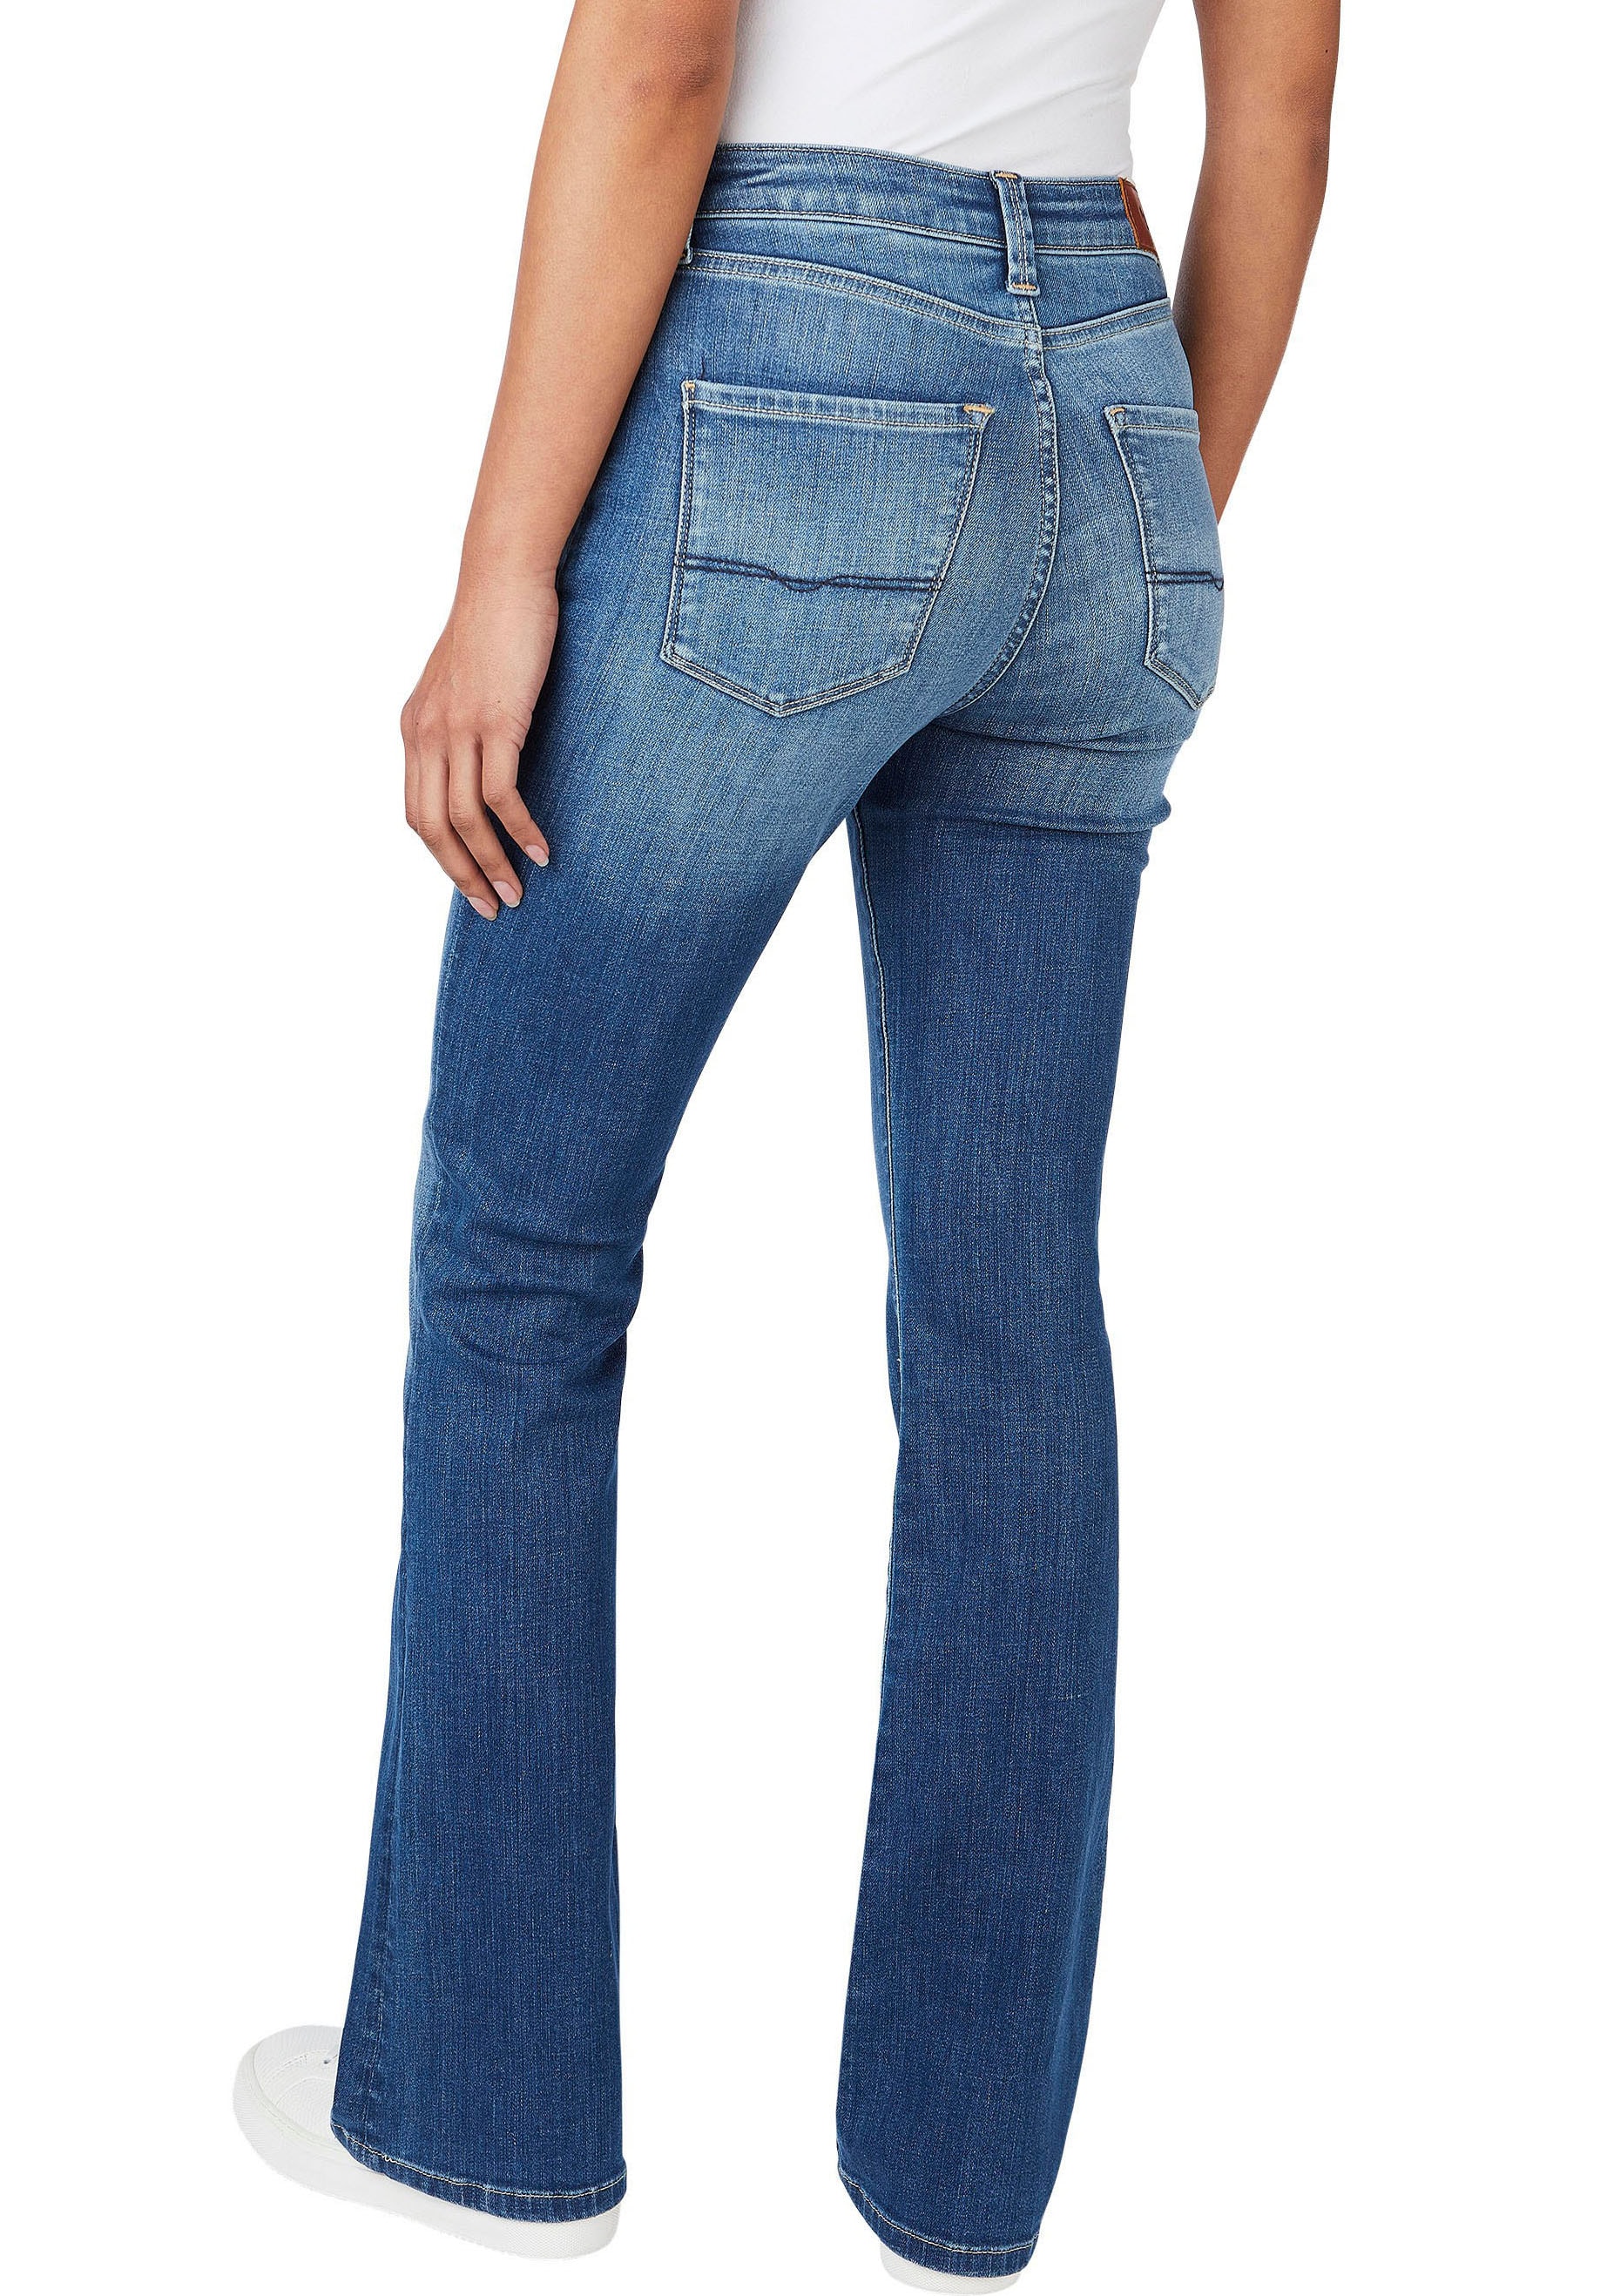 »Dion Bootcut-Jeans Pepe kaufen online Flare« Jeans